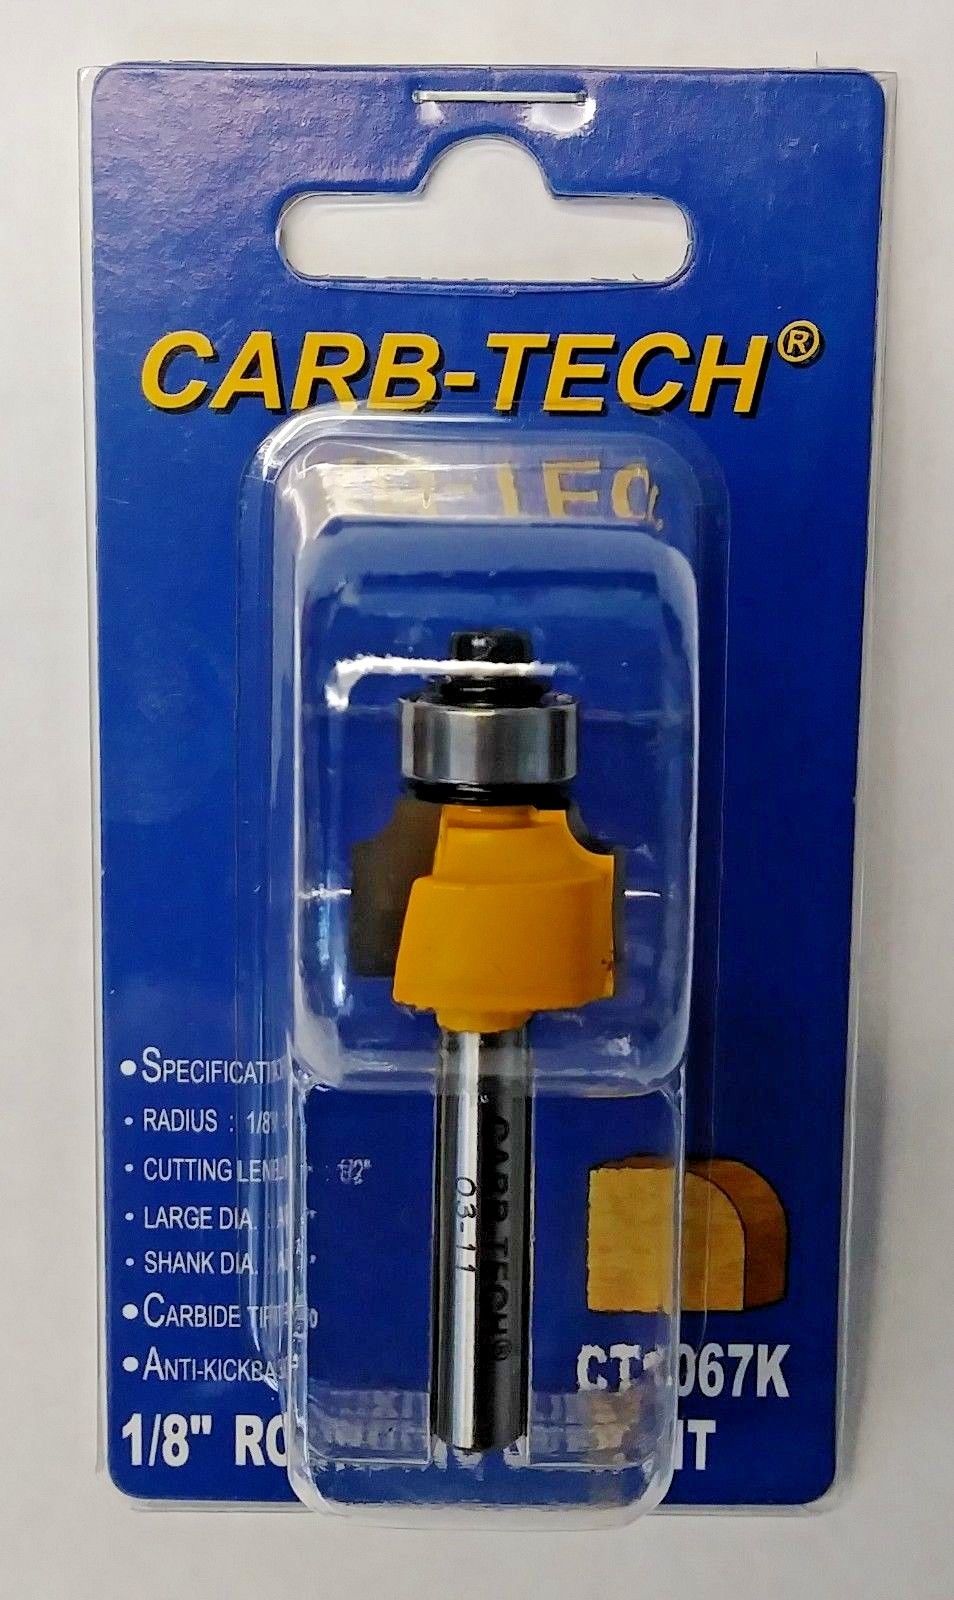 Carb-Tech CT1067K 1/8" Carbide Tipped Rounding Over Router Bit